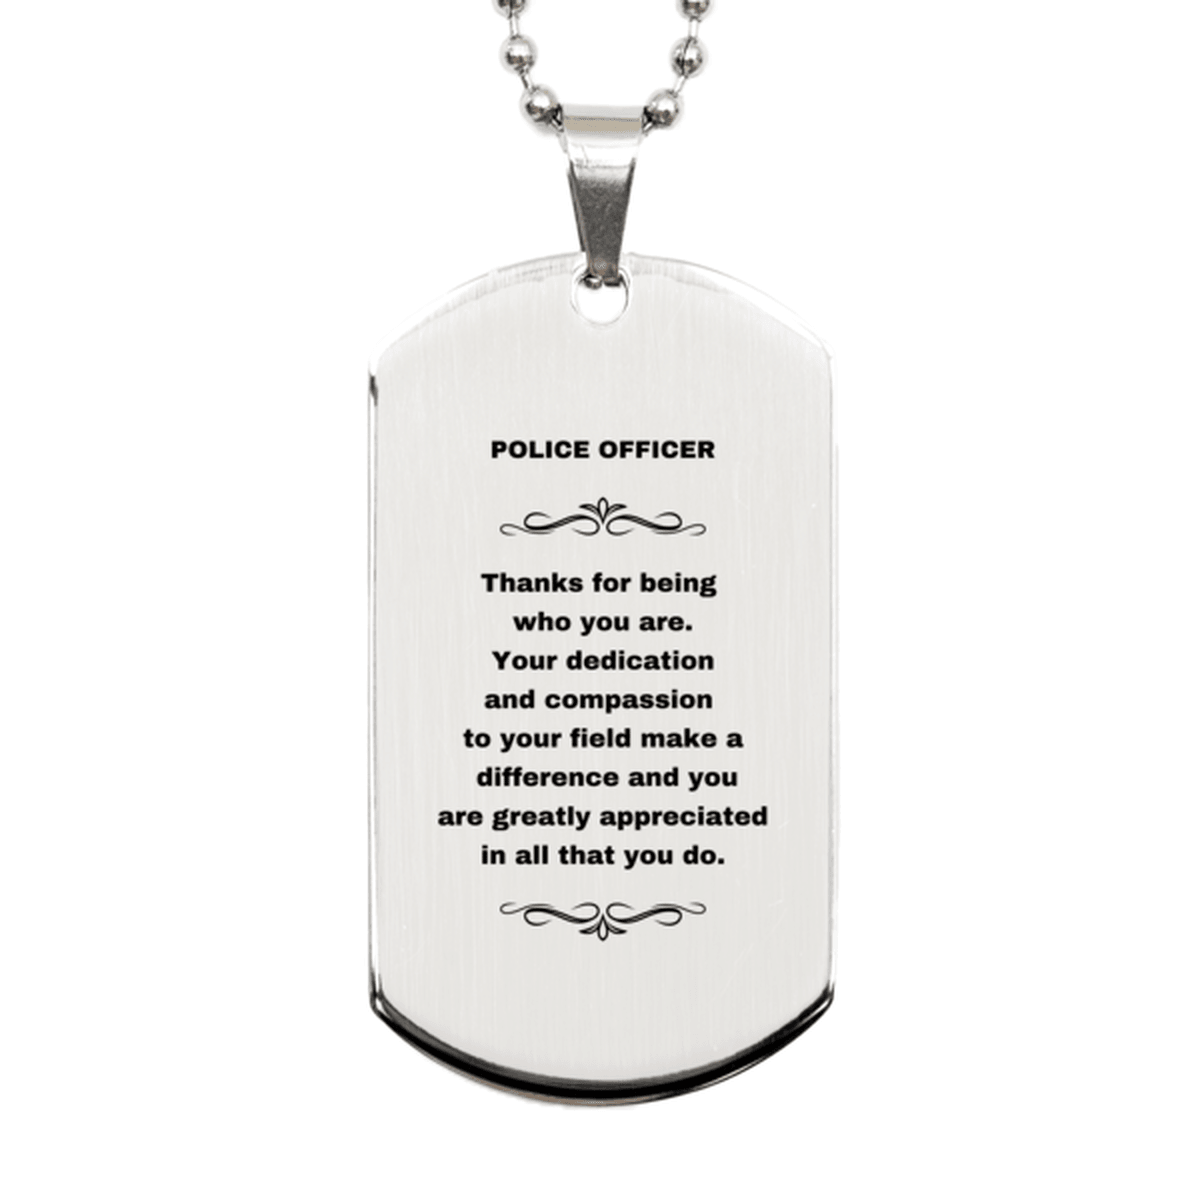 Police Officer Silver Dog Tag Engraved Necklace - Thanks for being who you are - Birthday Christmas Jewelry Gifts Coworkers Colleague Boss - Mallard Moon Gift Shop